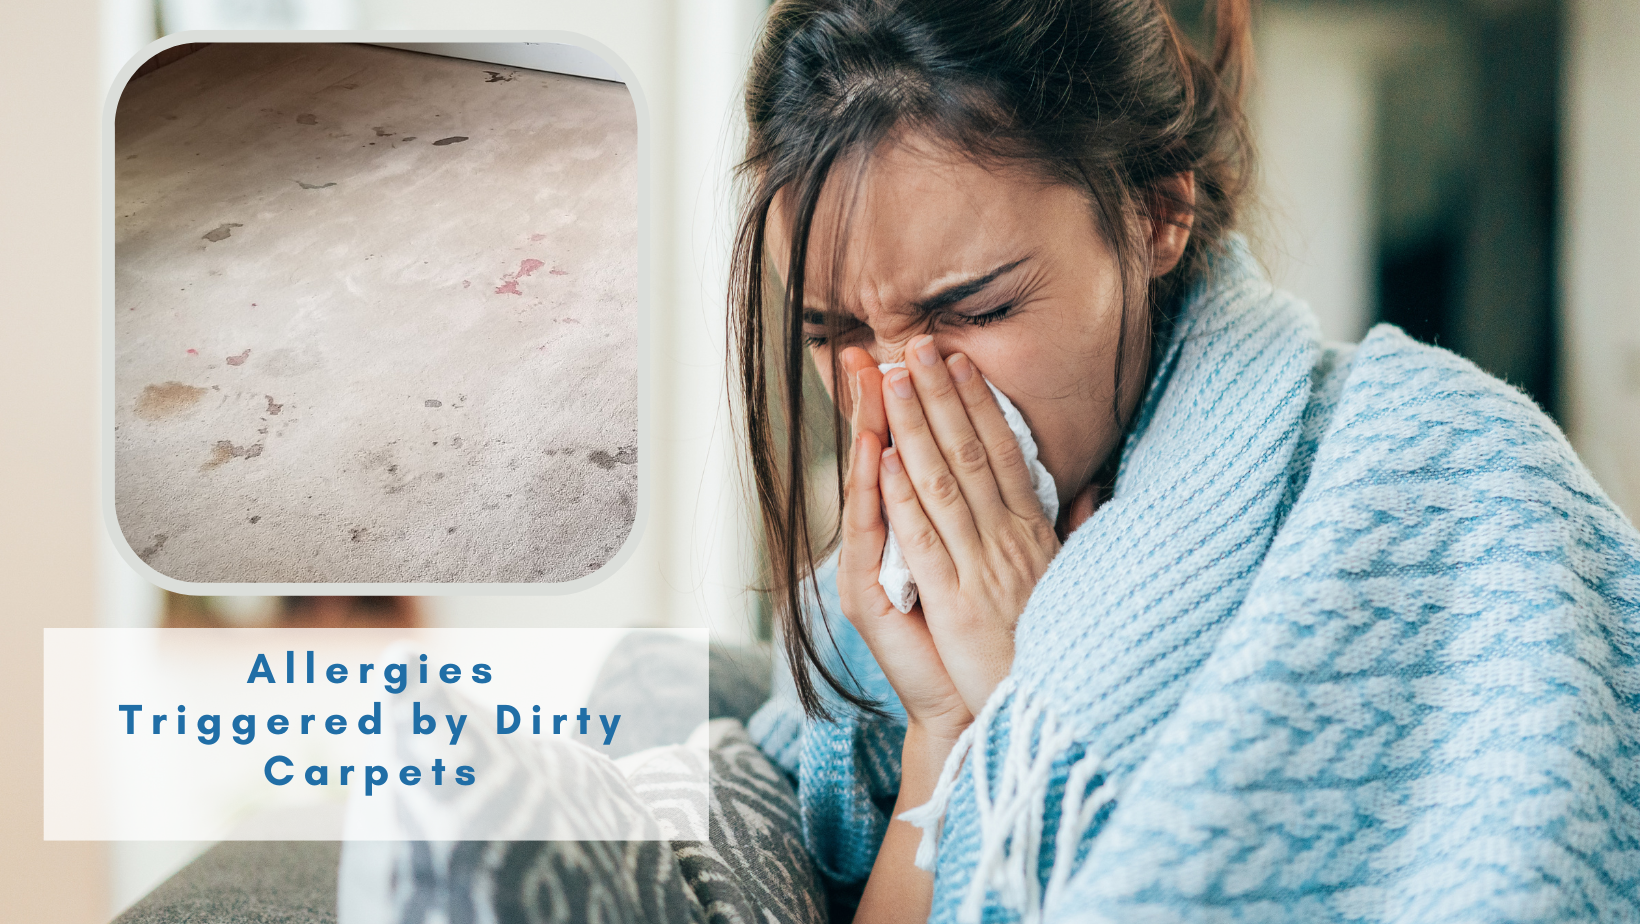 Allergies triggered by Dirty Carpets